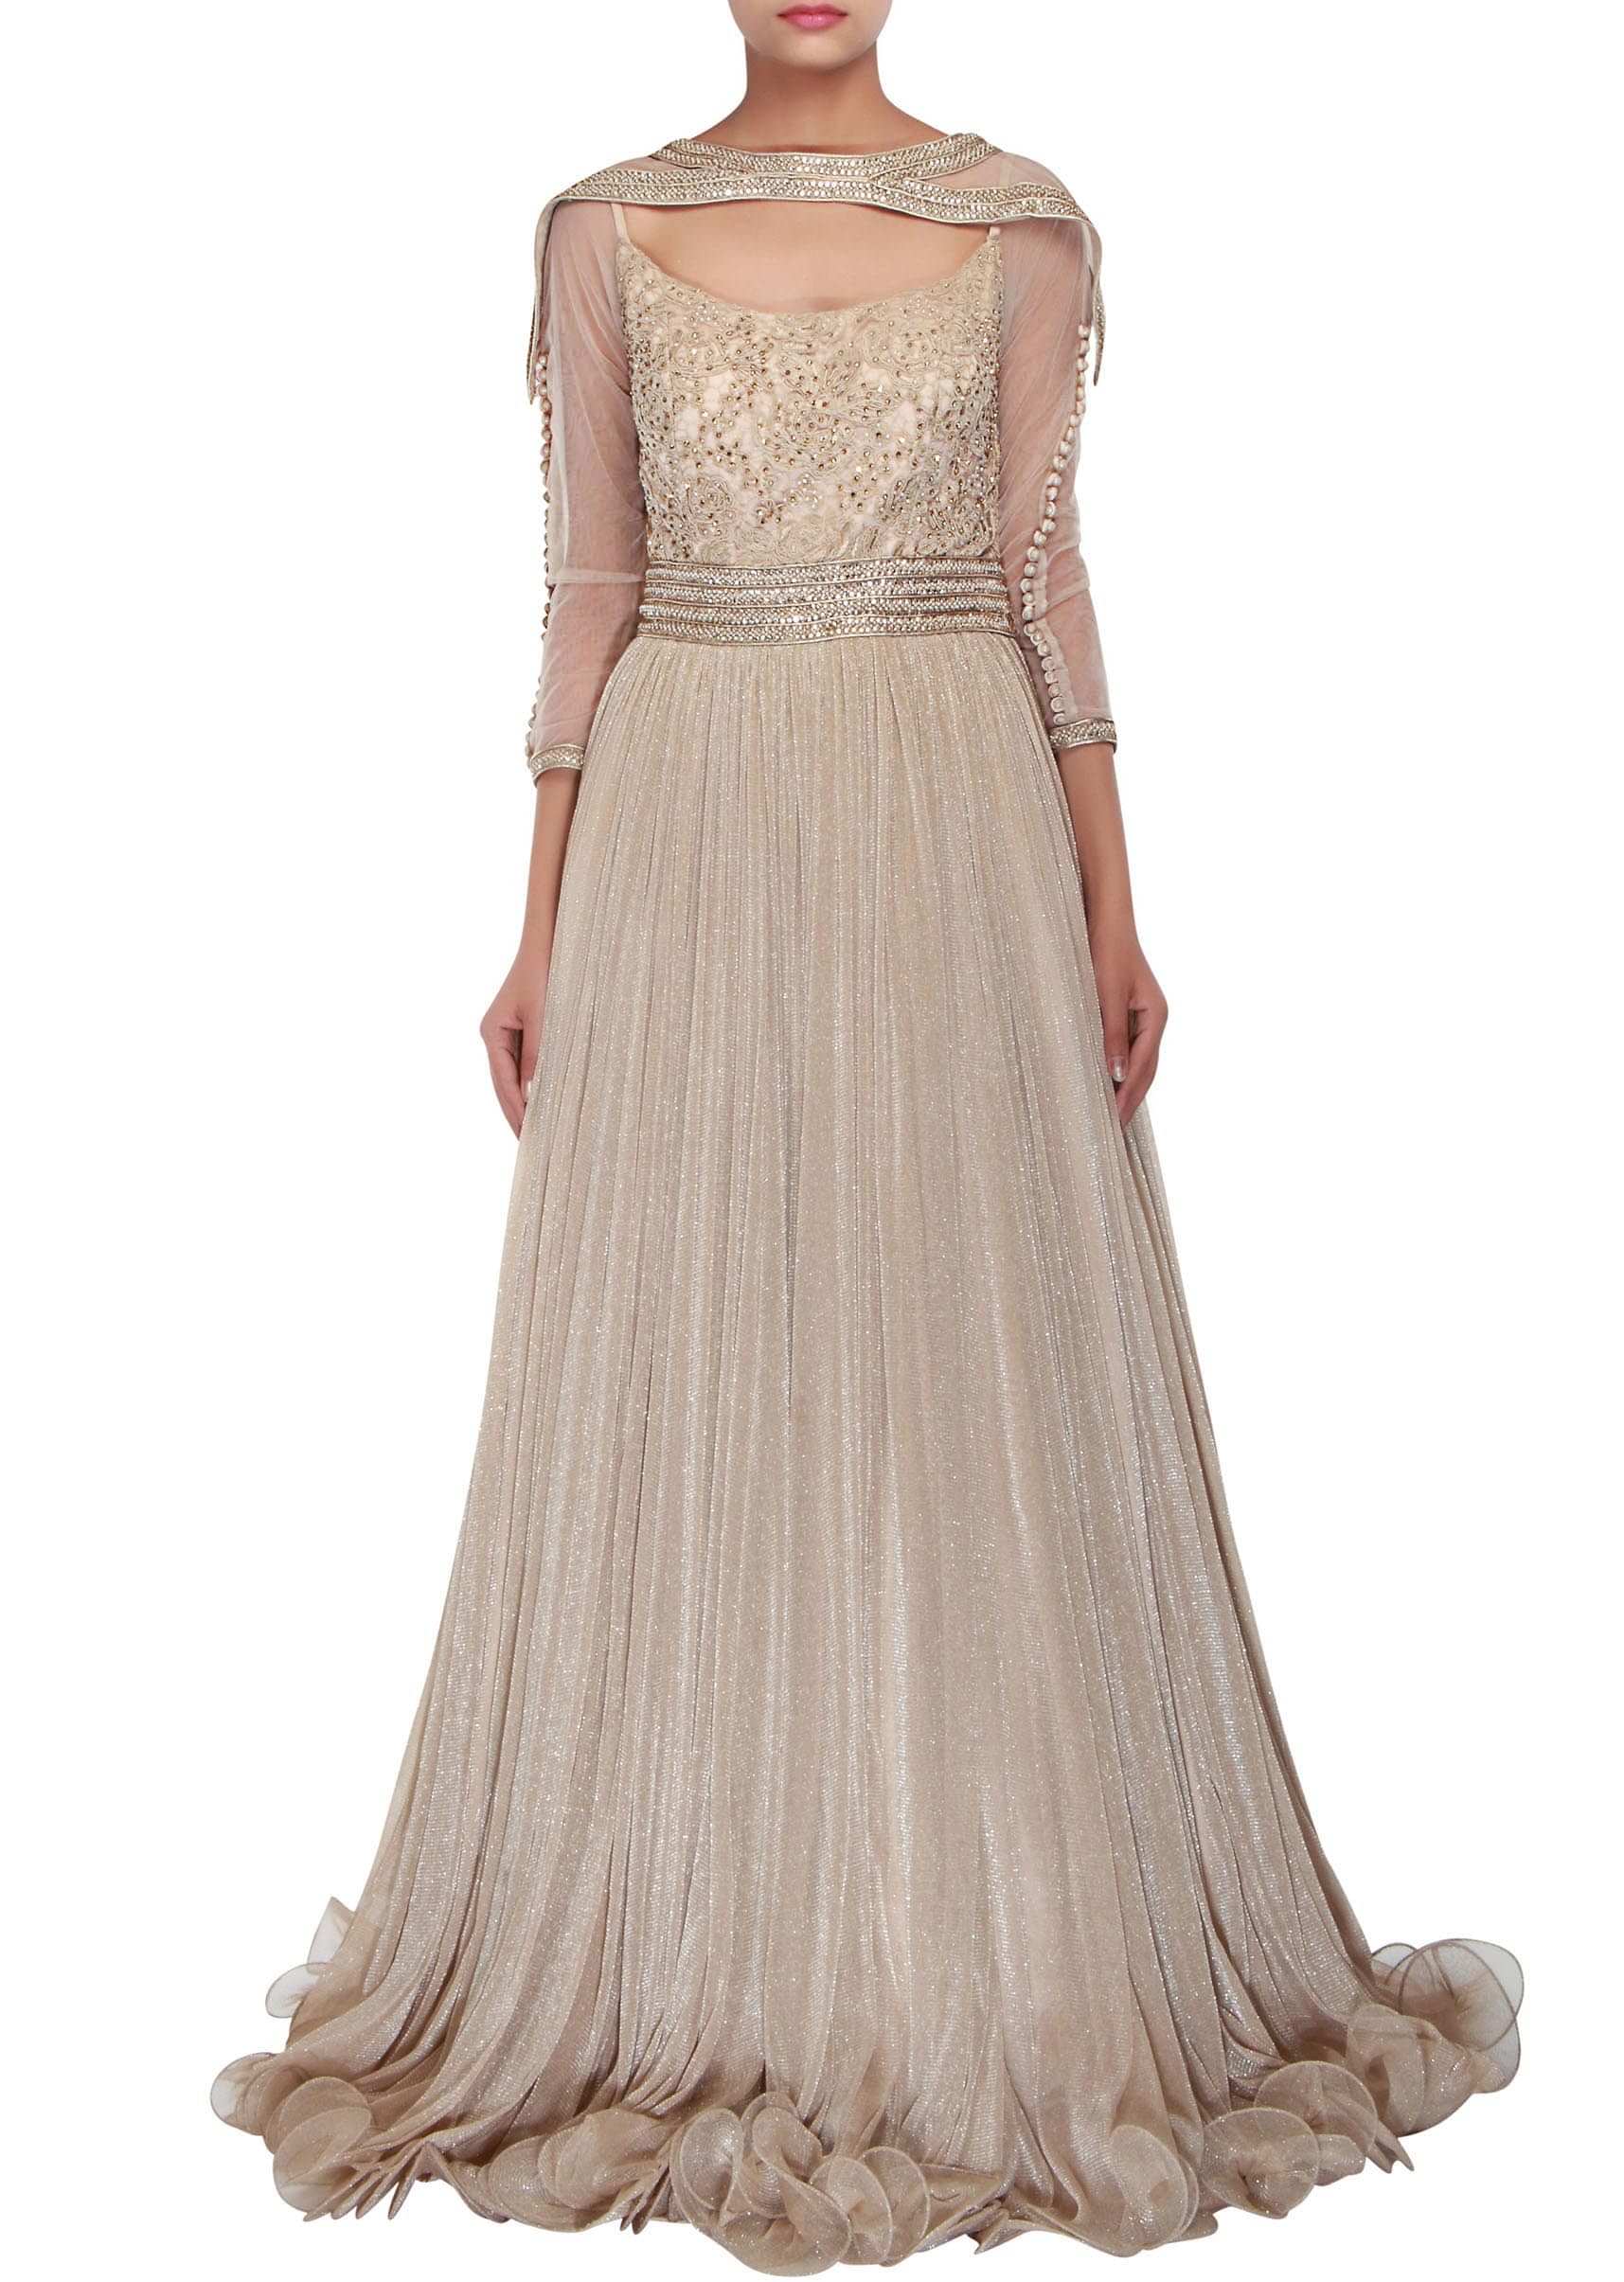 Seasam grey gown adorn in pearl and thread embellishment only on Kalki